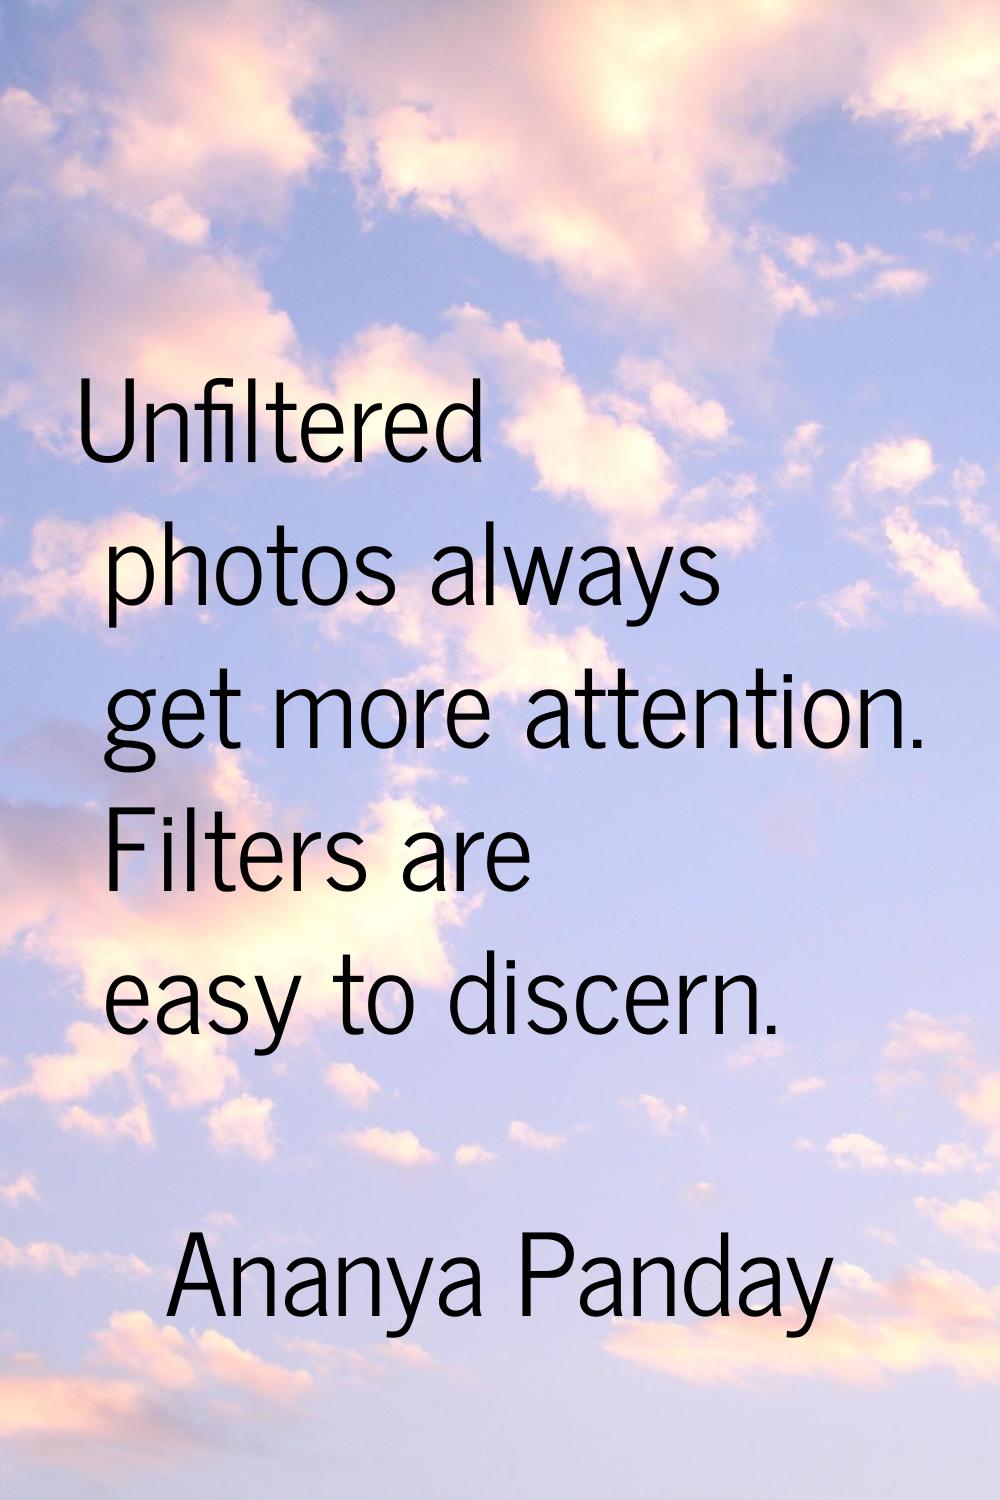 Unfiltered photos always get more attention. Filters are easy to discern.